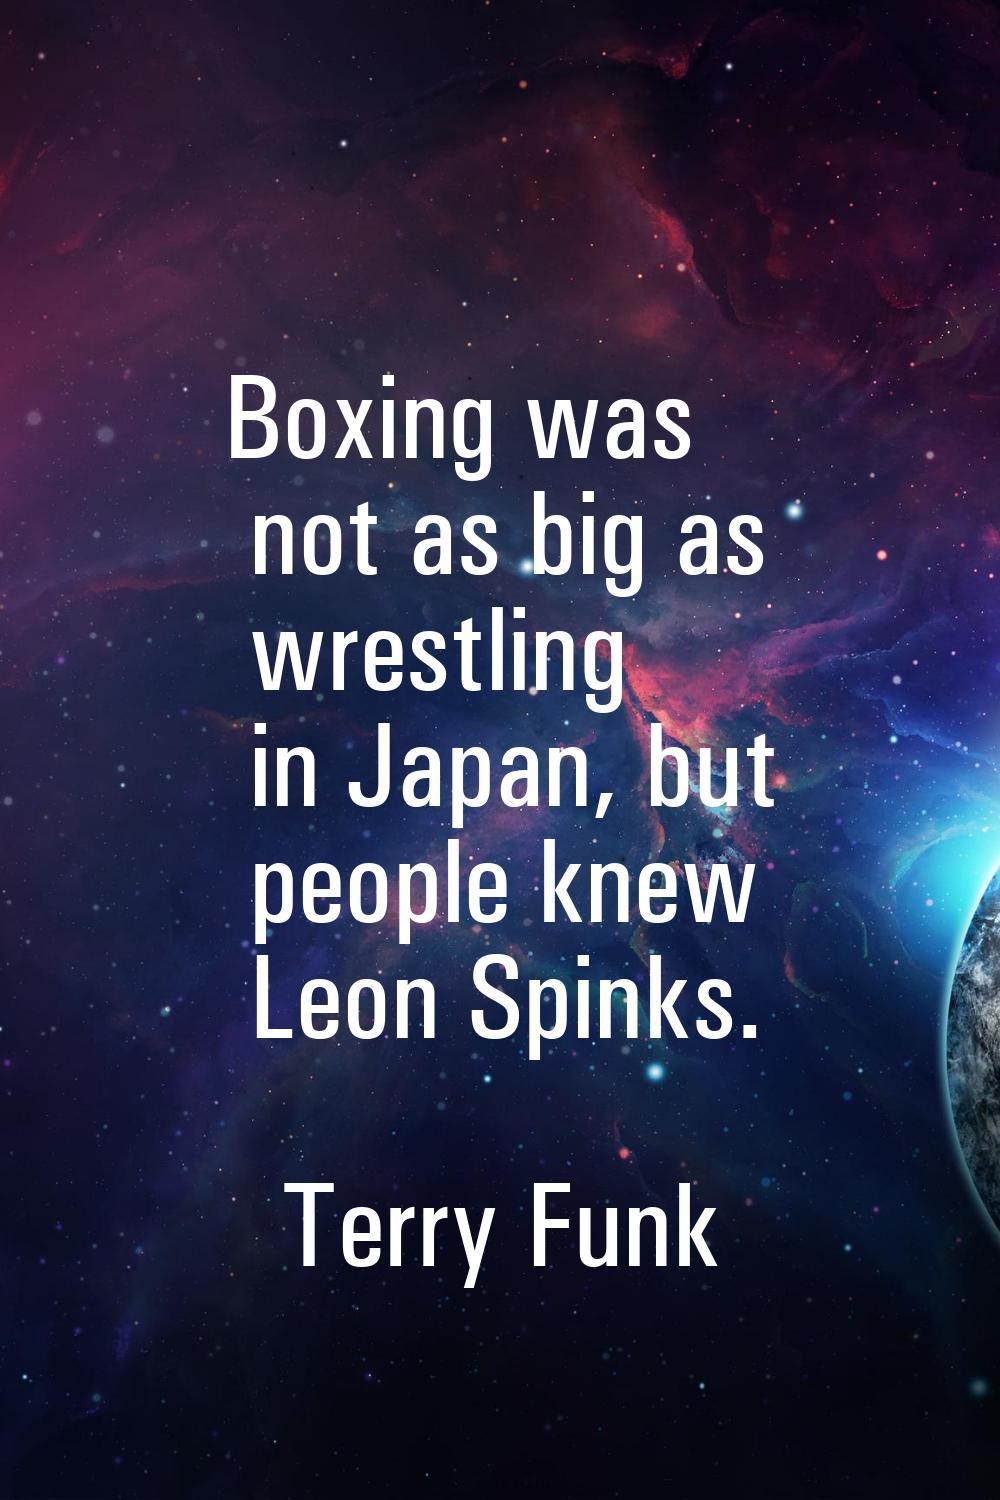 Boxing was not as big as wrestling in Japan, but people knew Leon Spinks.